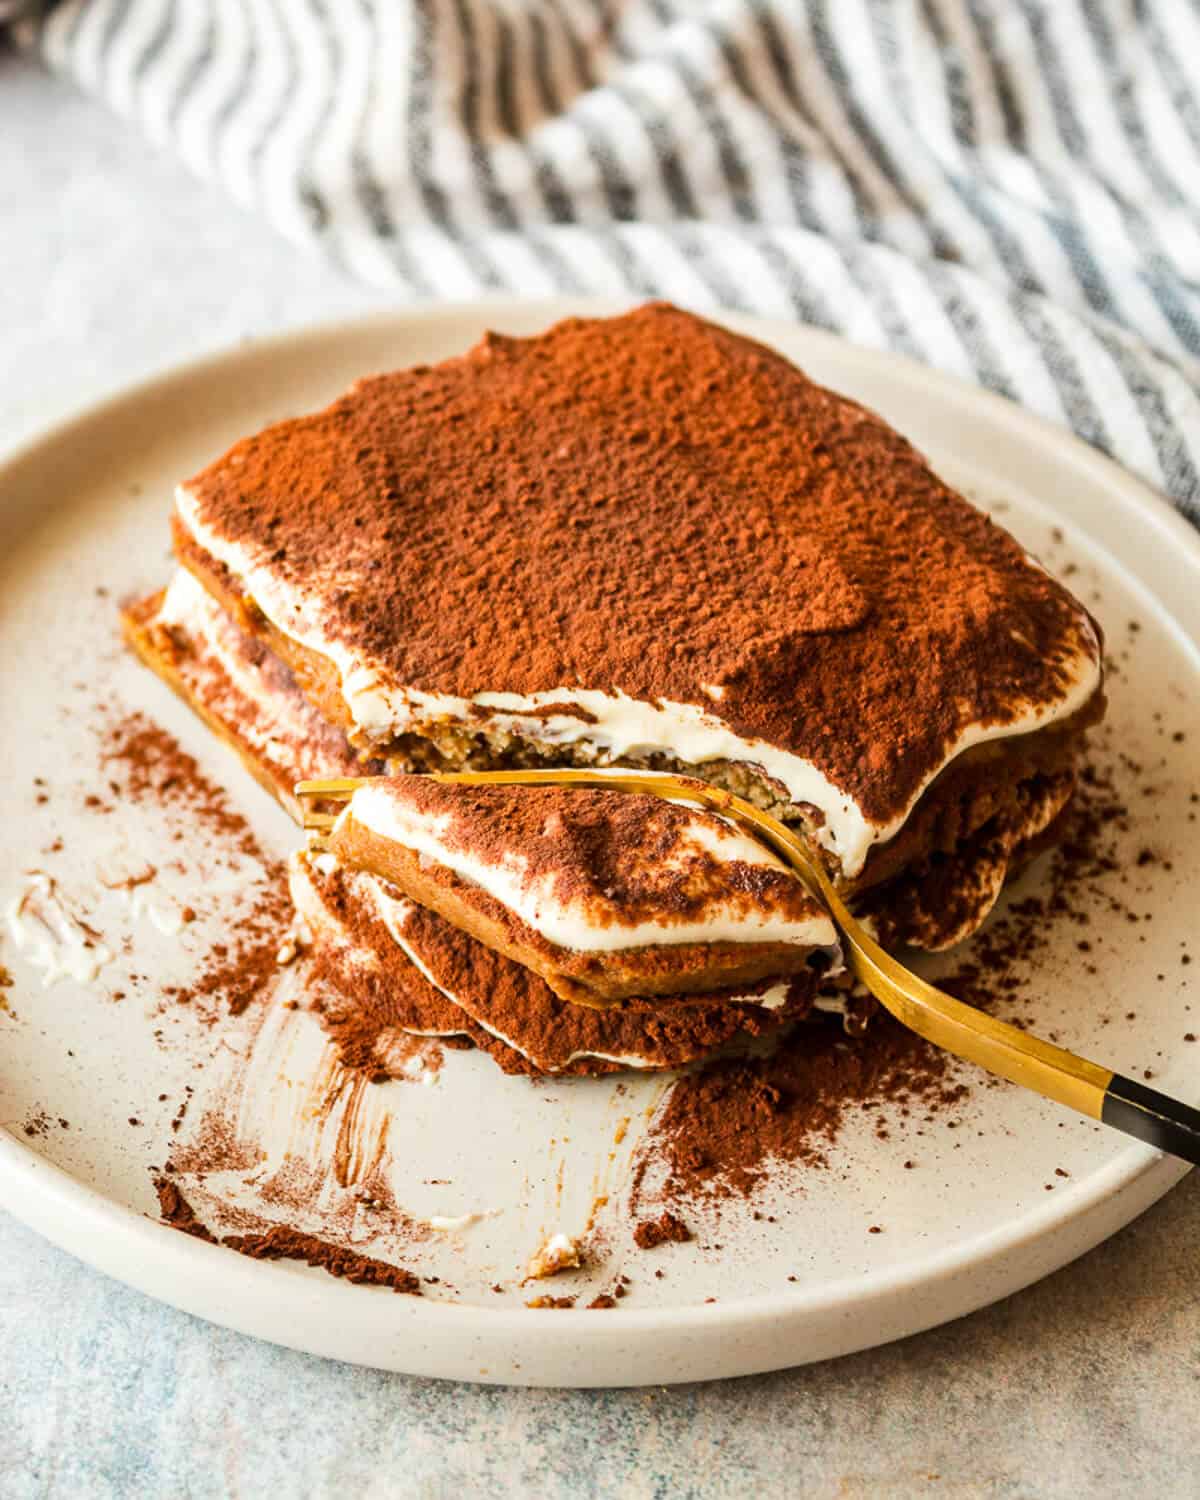 A single serving of tiramisu on a grey plate. There is a fork cutting a section of the tiramisu off.